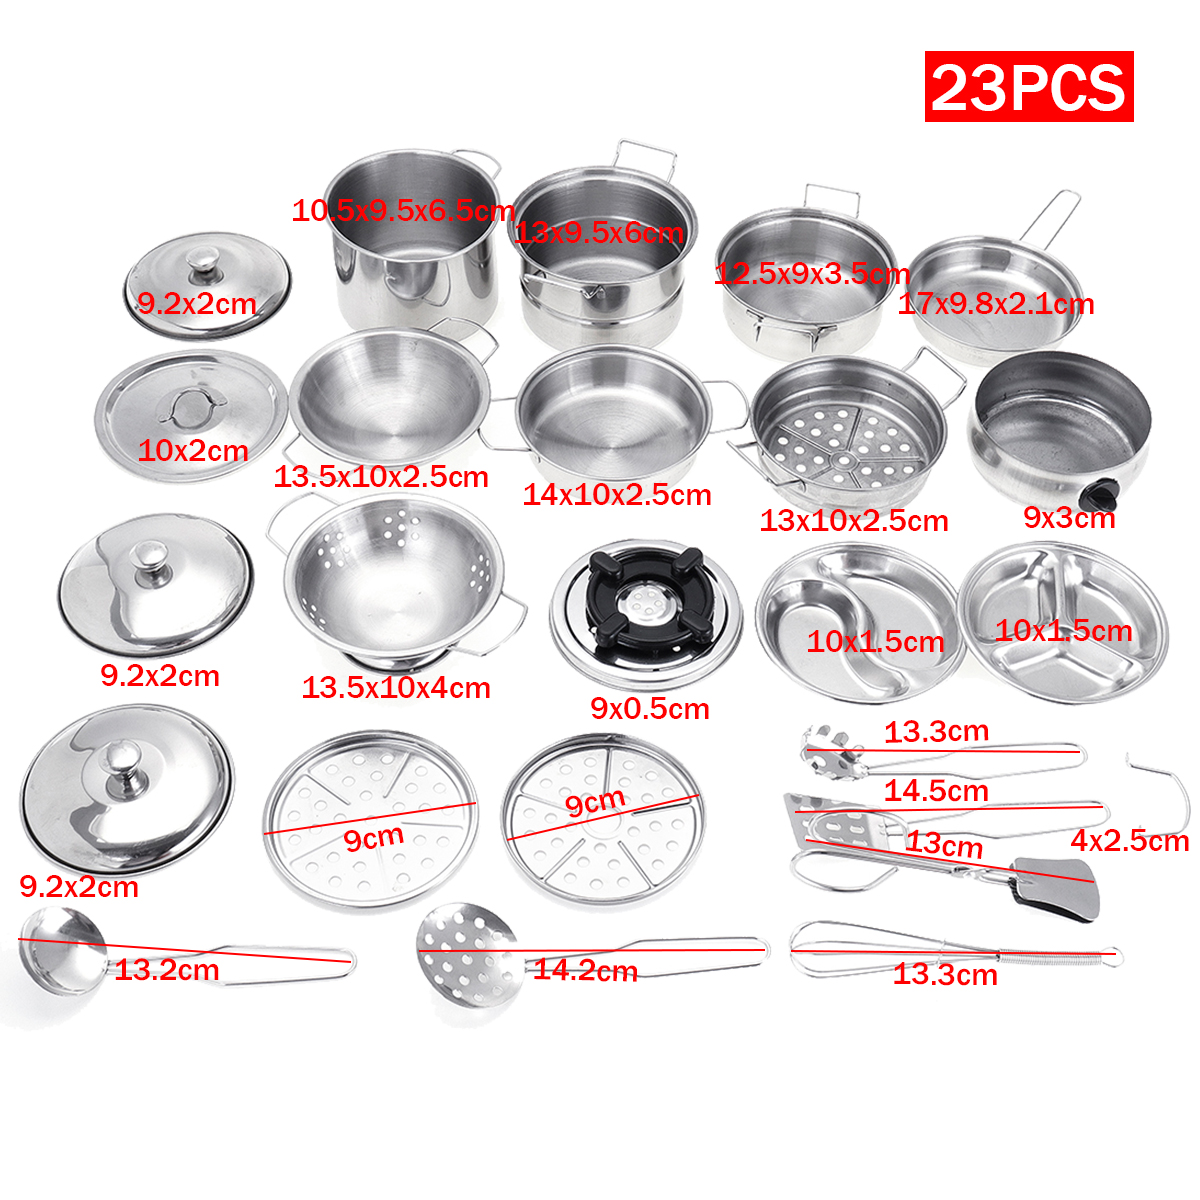 32PCS-Mini-Stainless-Steel-Kitchen-Cutlery-Play-House-Food-Toy-Boiler-Kettle-Cup-Bowl-Spoon-Cookware-1423237-2